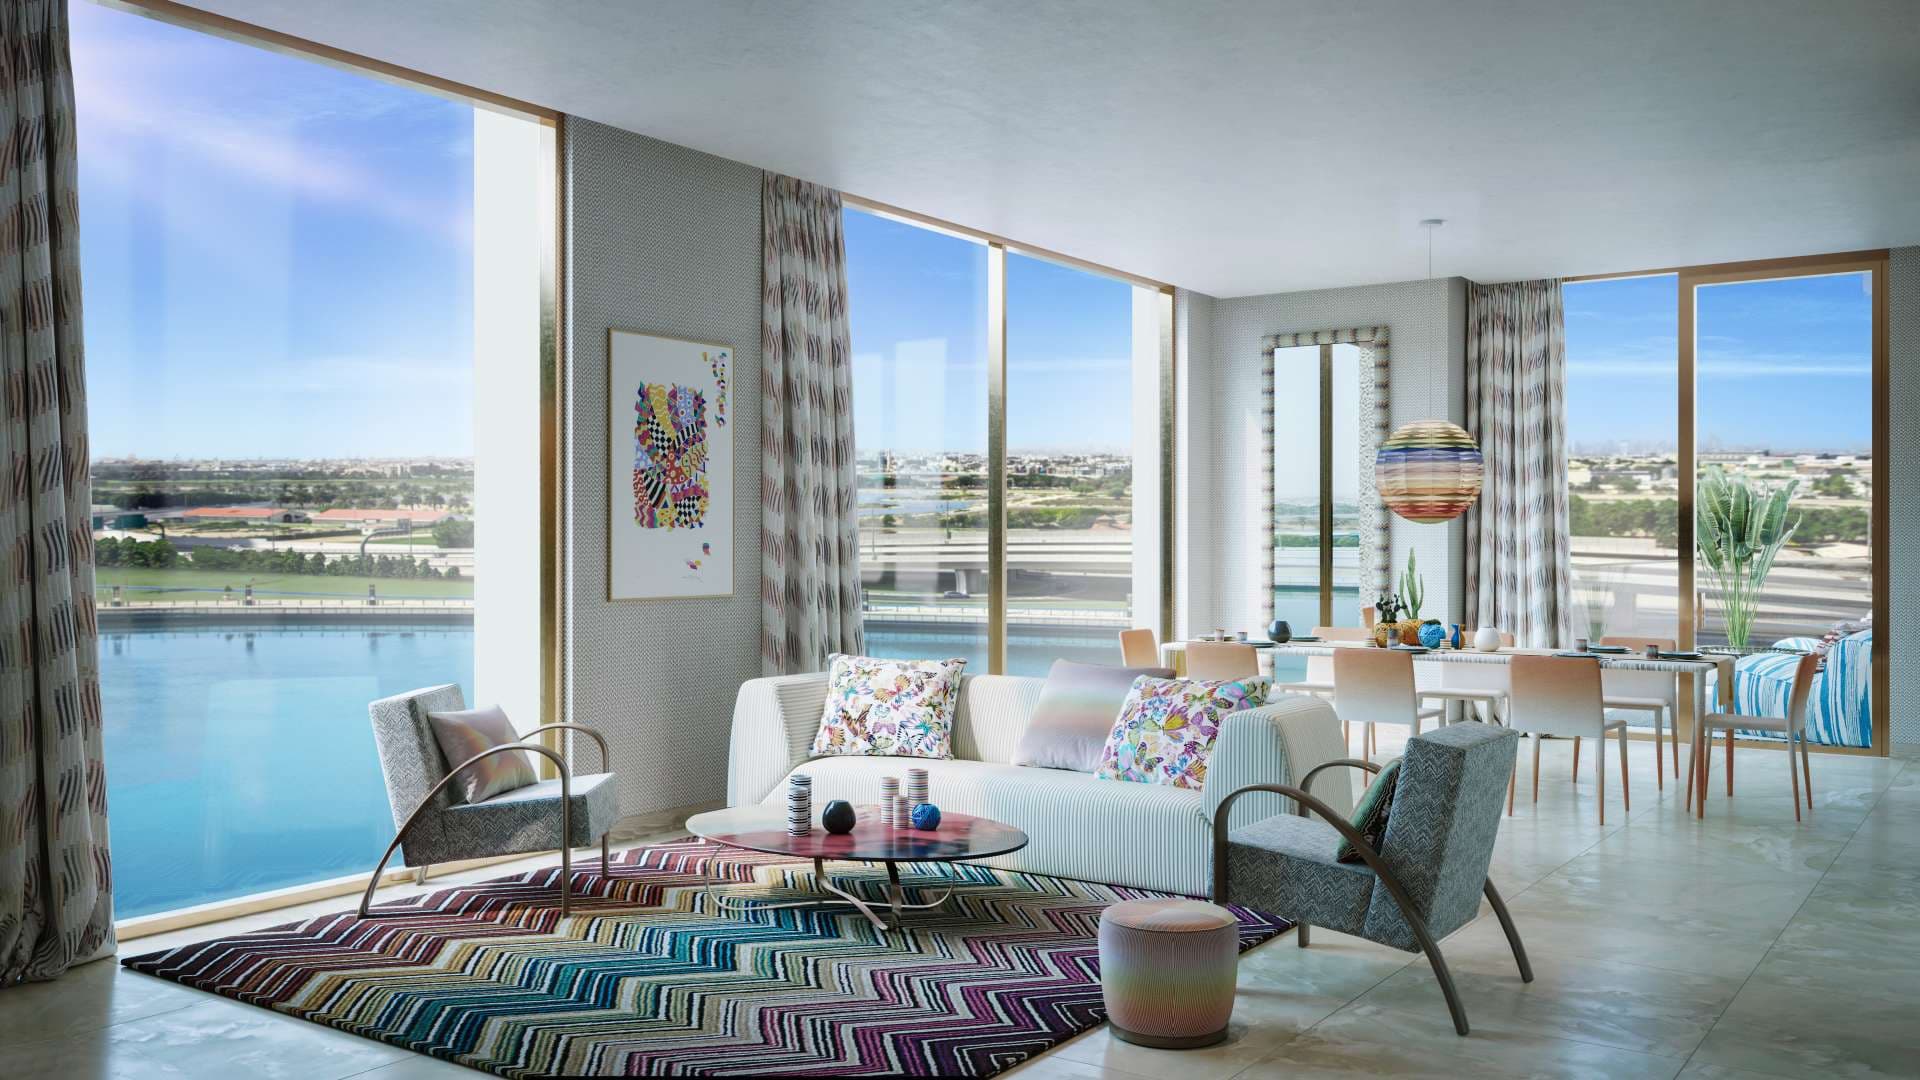 3 Bedroom Apartment For Sale Urban Oasis By Missoni Lp07537 12dc52409b823700.jpg